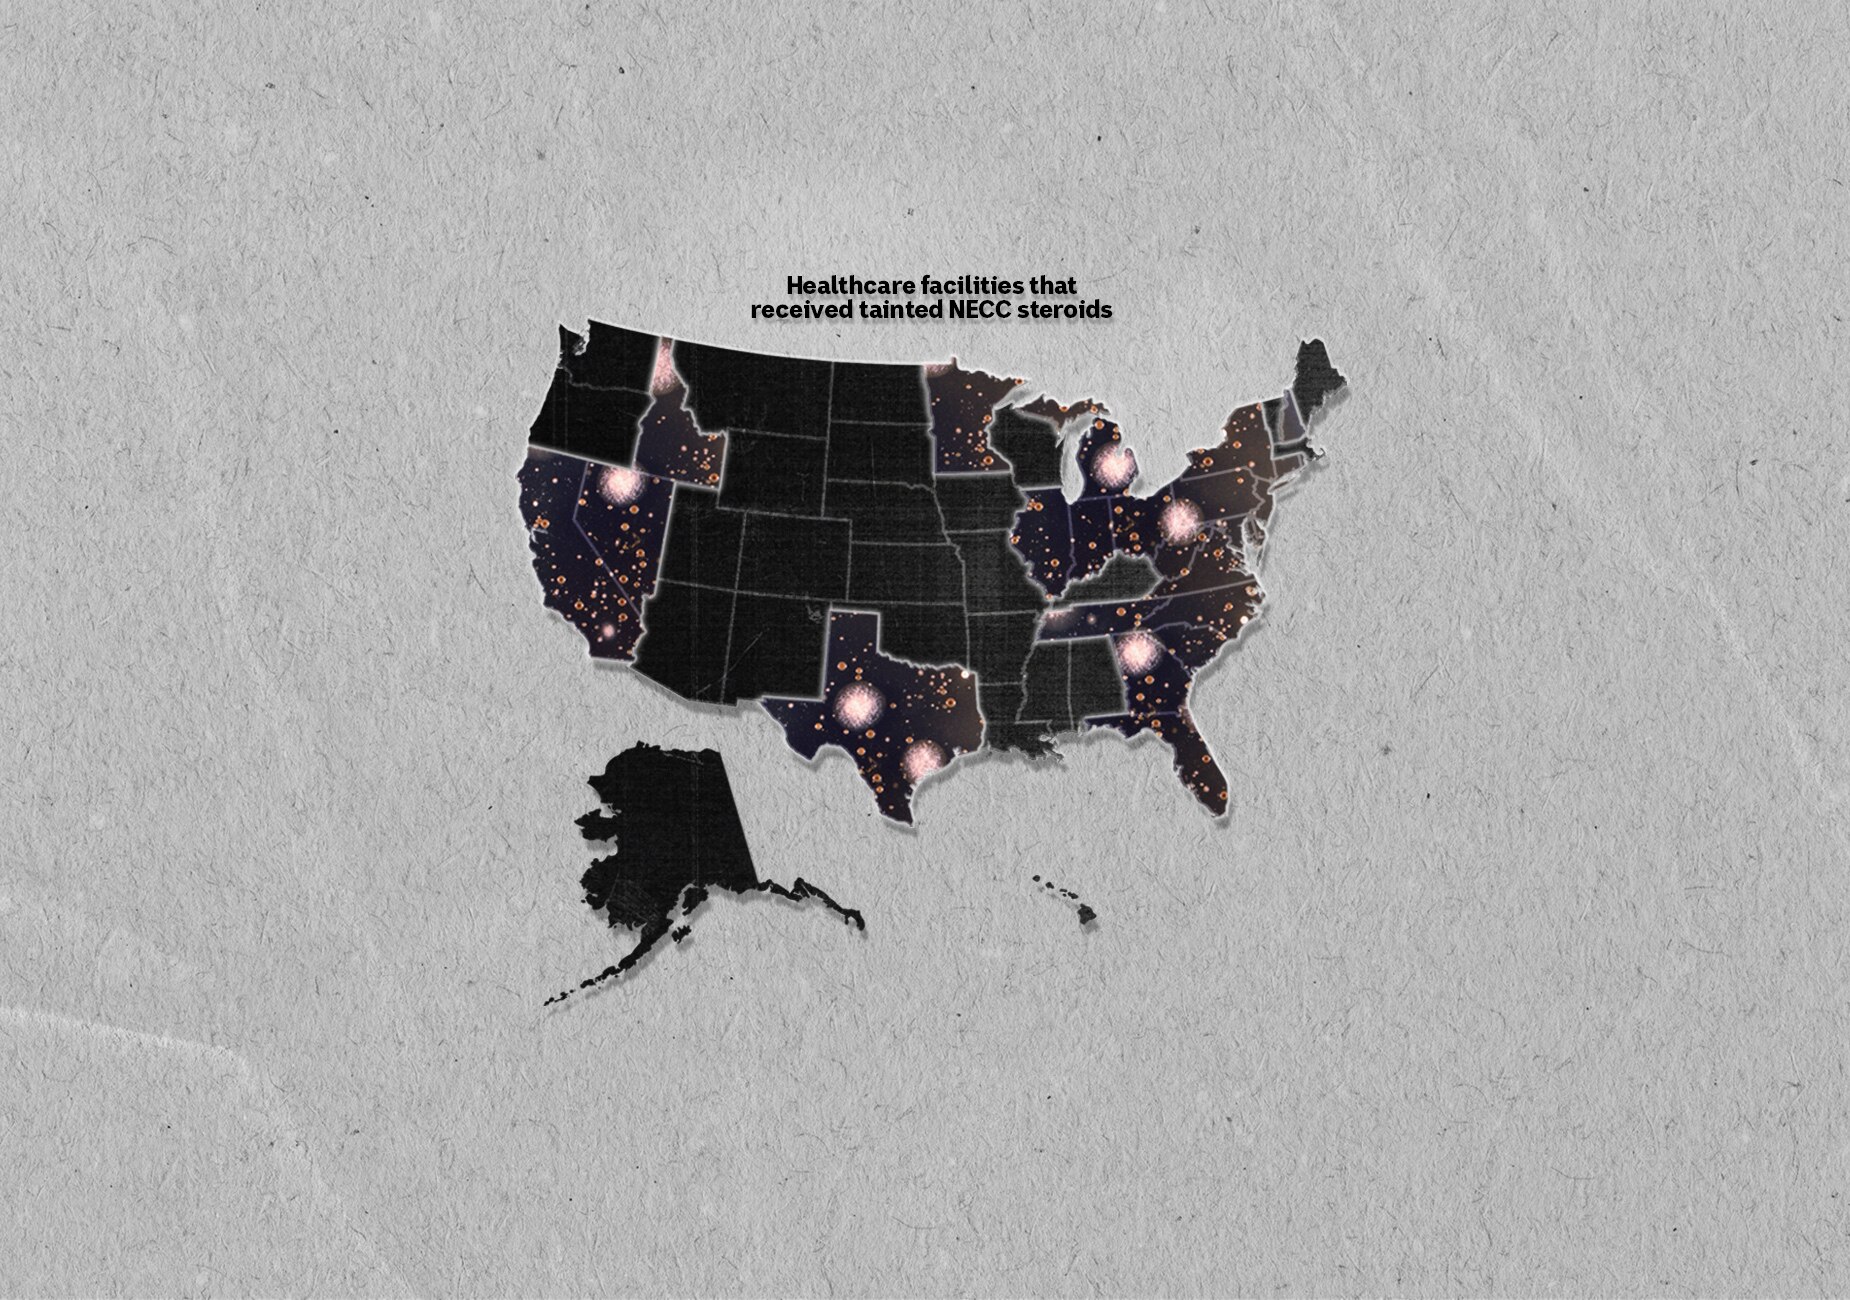 Bacteria image overlaid on various US states on black vector US map on grey paper background.